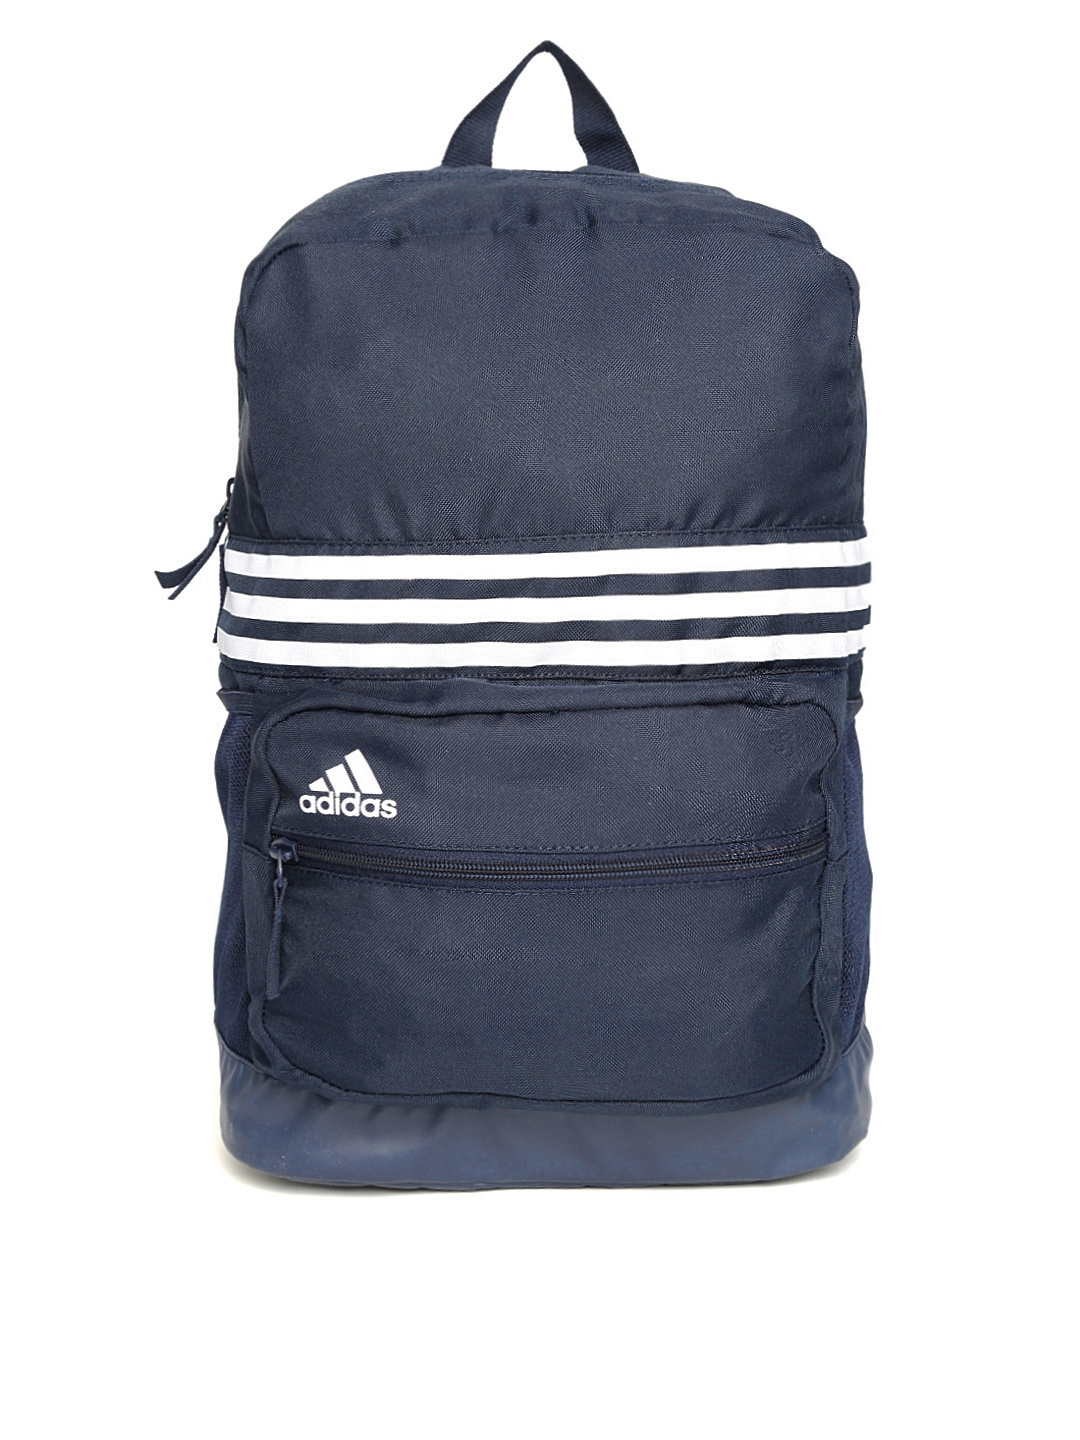 Buy ADIDAS Unisex Navy M 3S Striped Backpack - Backpacks for 1504626 Myntra